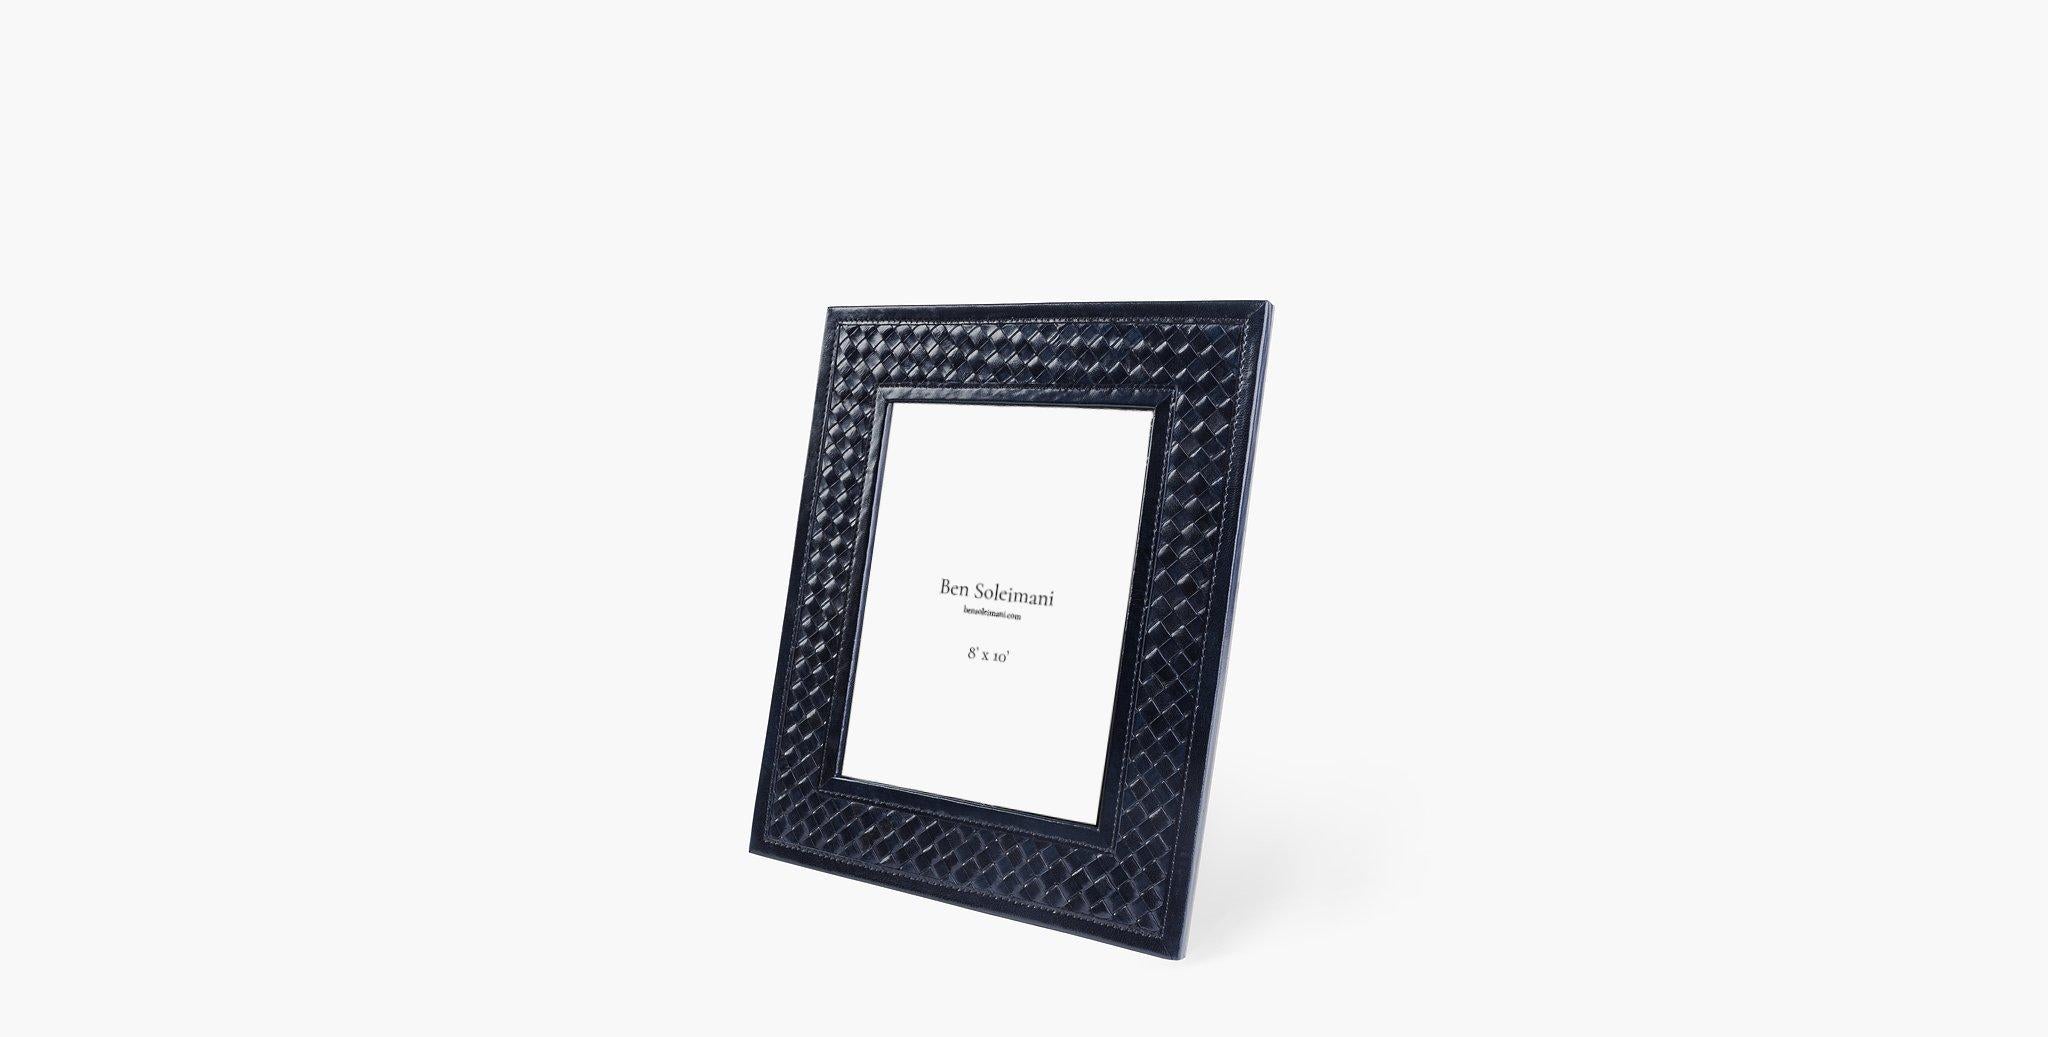 A highly tactile design via woven supple leather, our Clarion Picture Frame acts as a luxurious and functional decorative accent for your space. 

Basketweave leather design
Imported